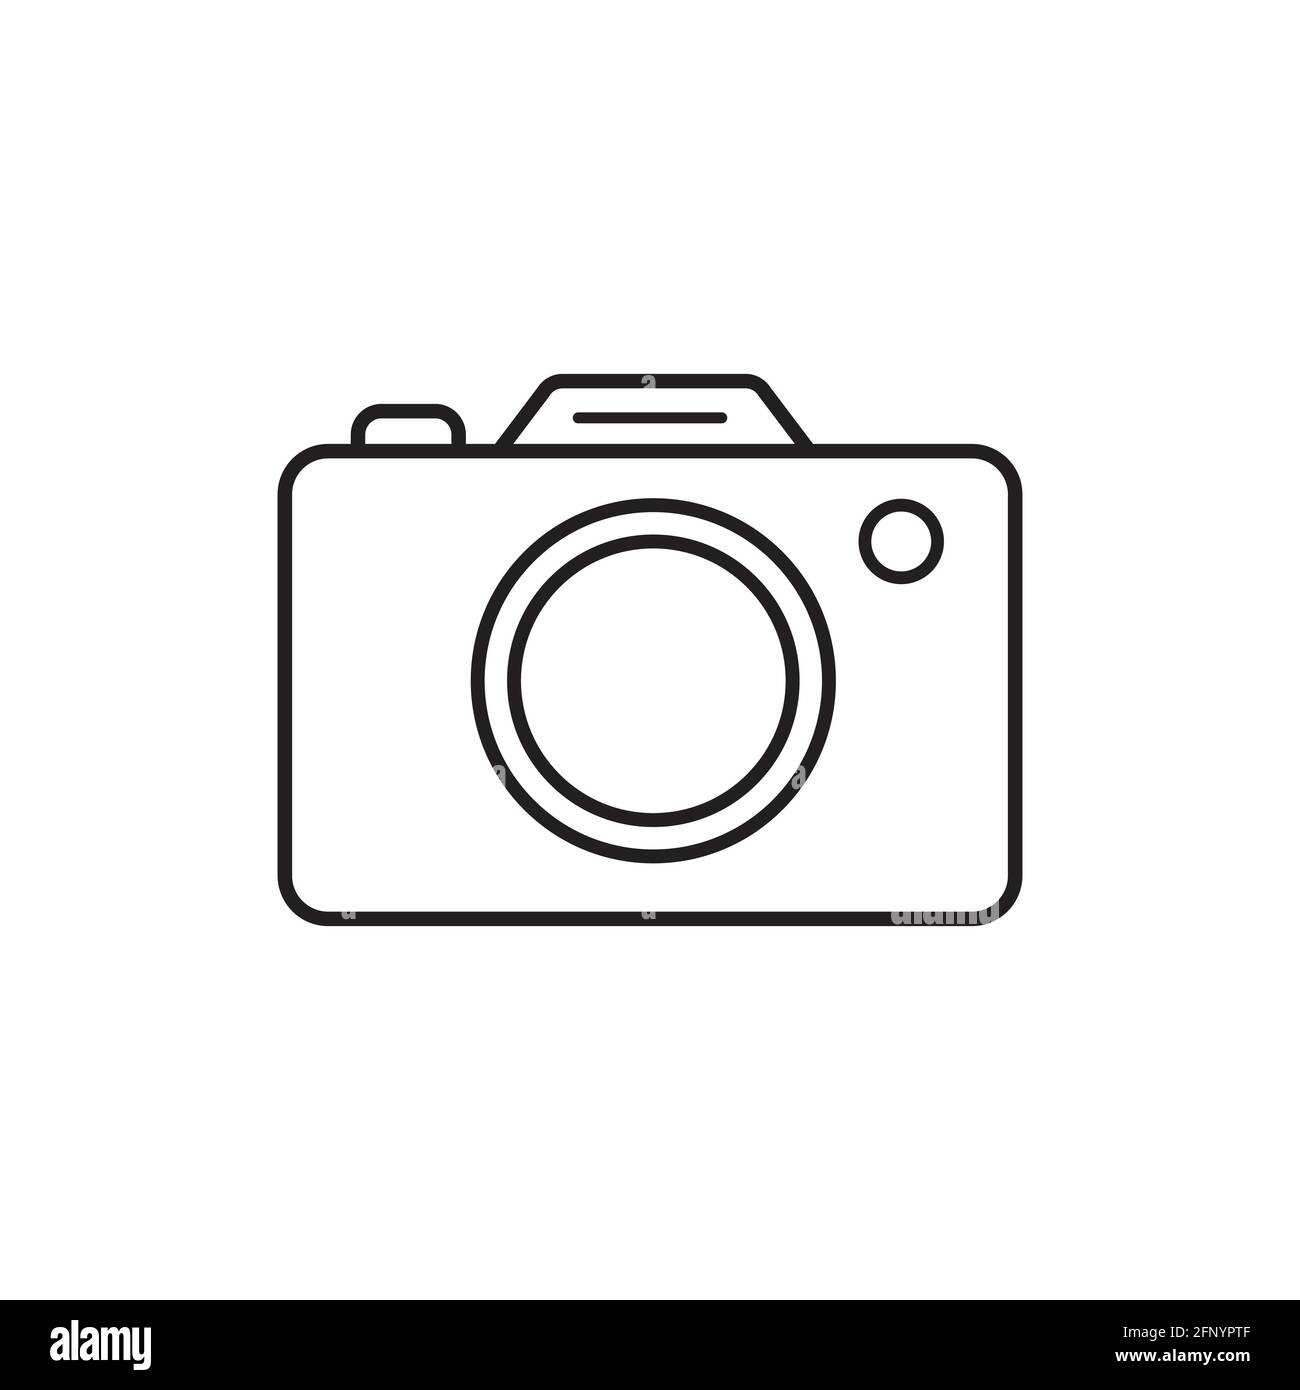 Camera icon symbol isolated on white background. Vector illustration Stock Vector